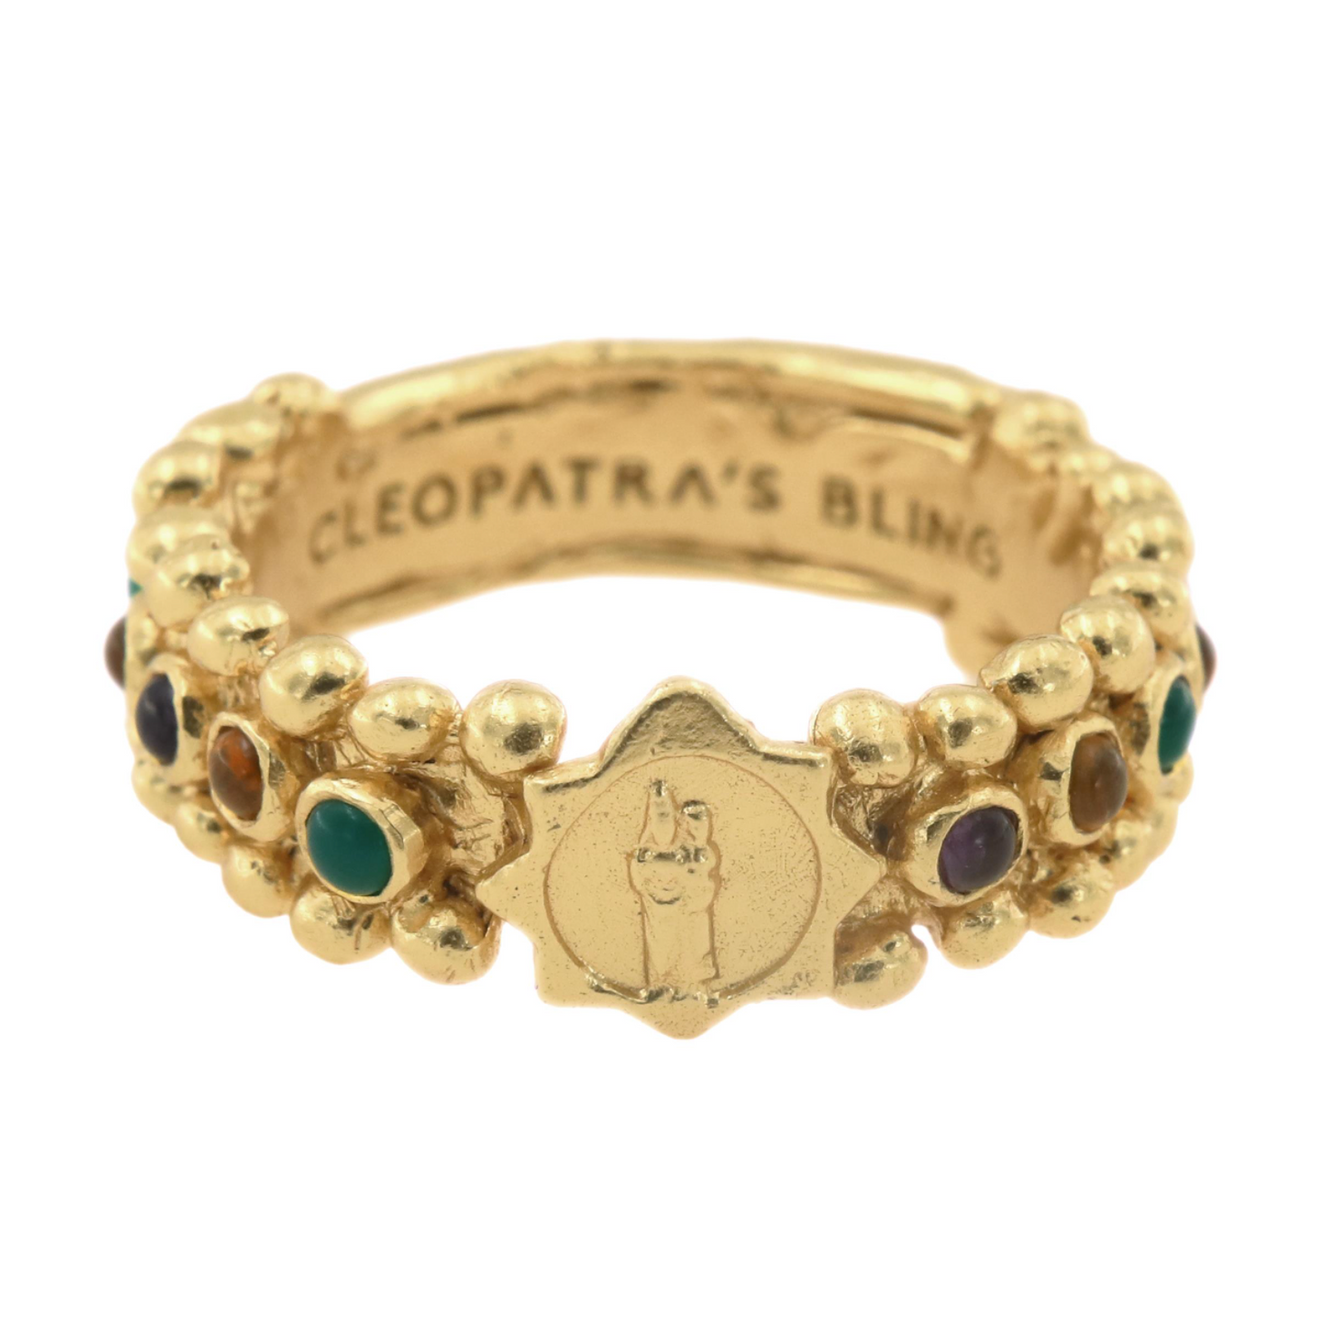 DINA CLARENZA RING WITH TRICOLOUR GEMS - 18K GOLD PLATED - CLEOPATRAS BLING